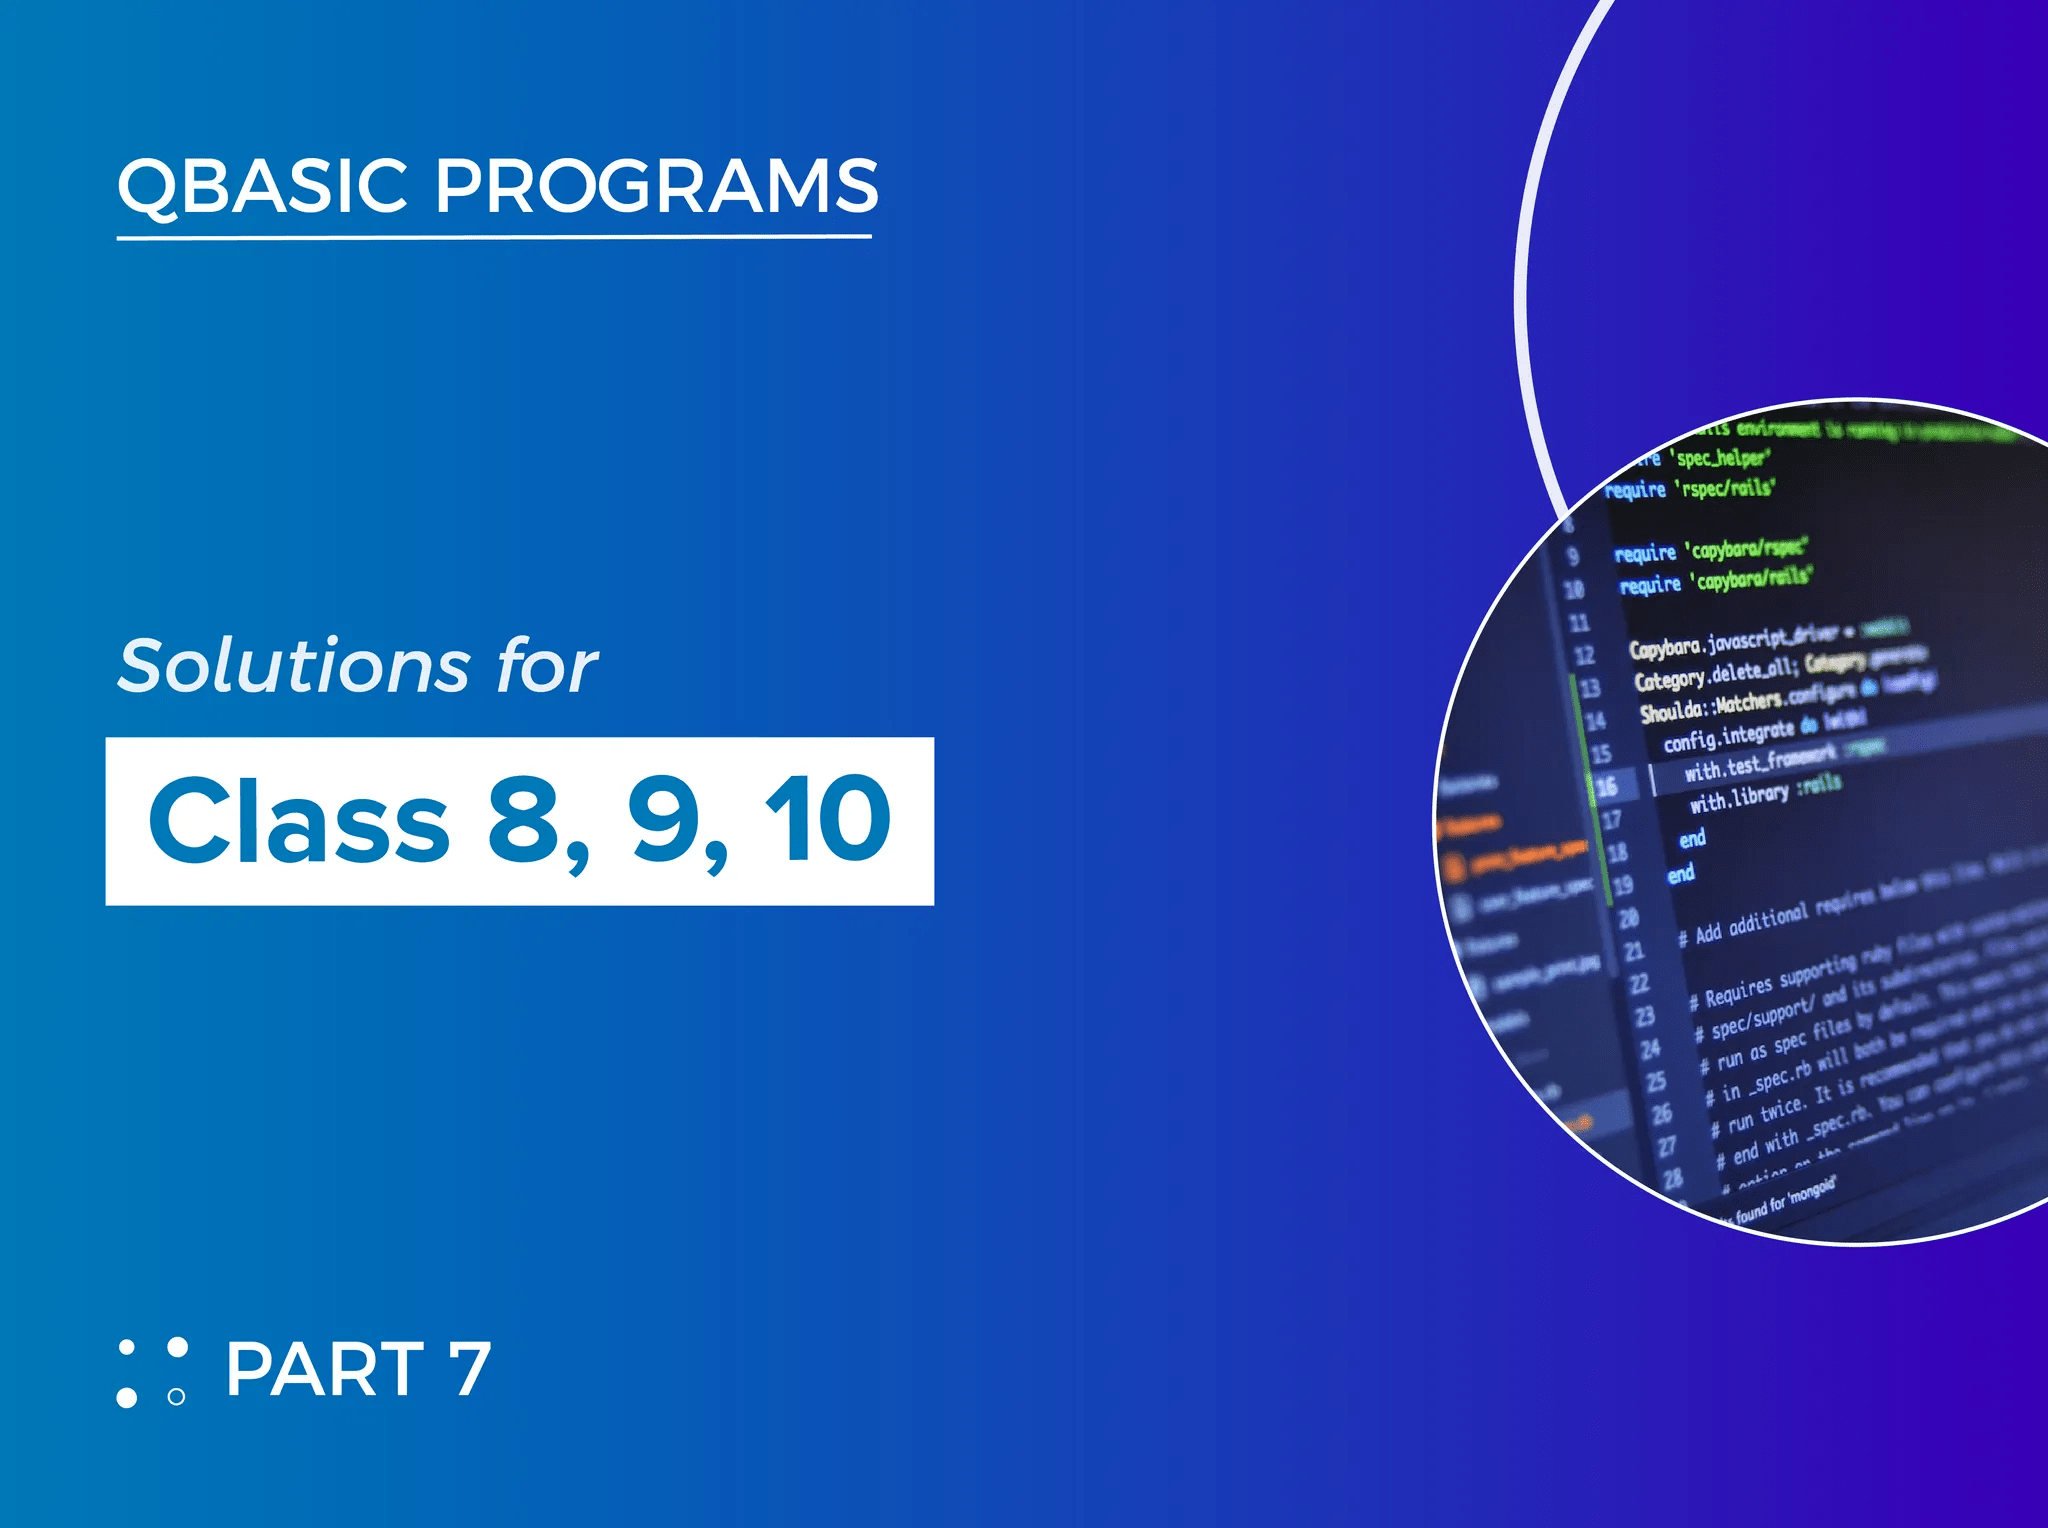 qbasic programs for class 8,9 and 10 part 7